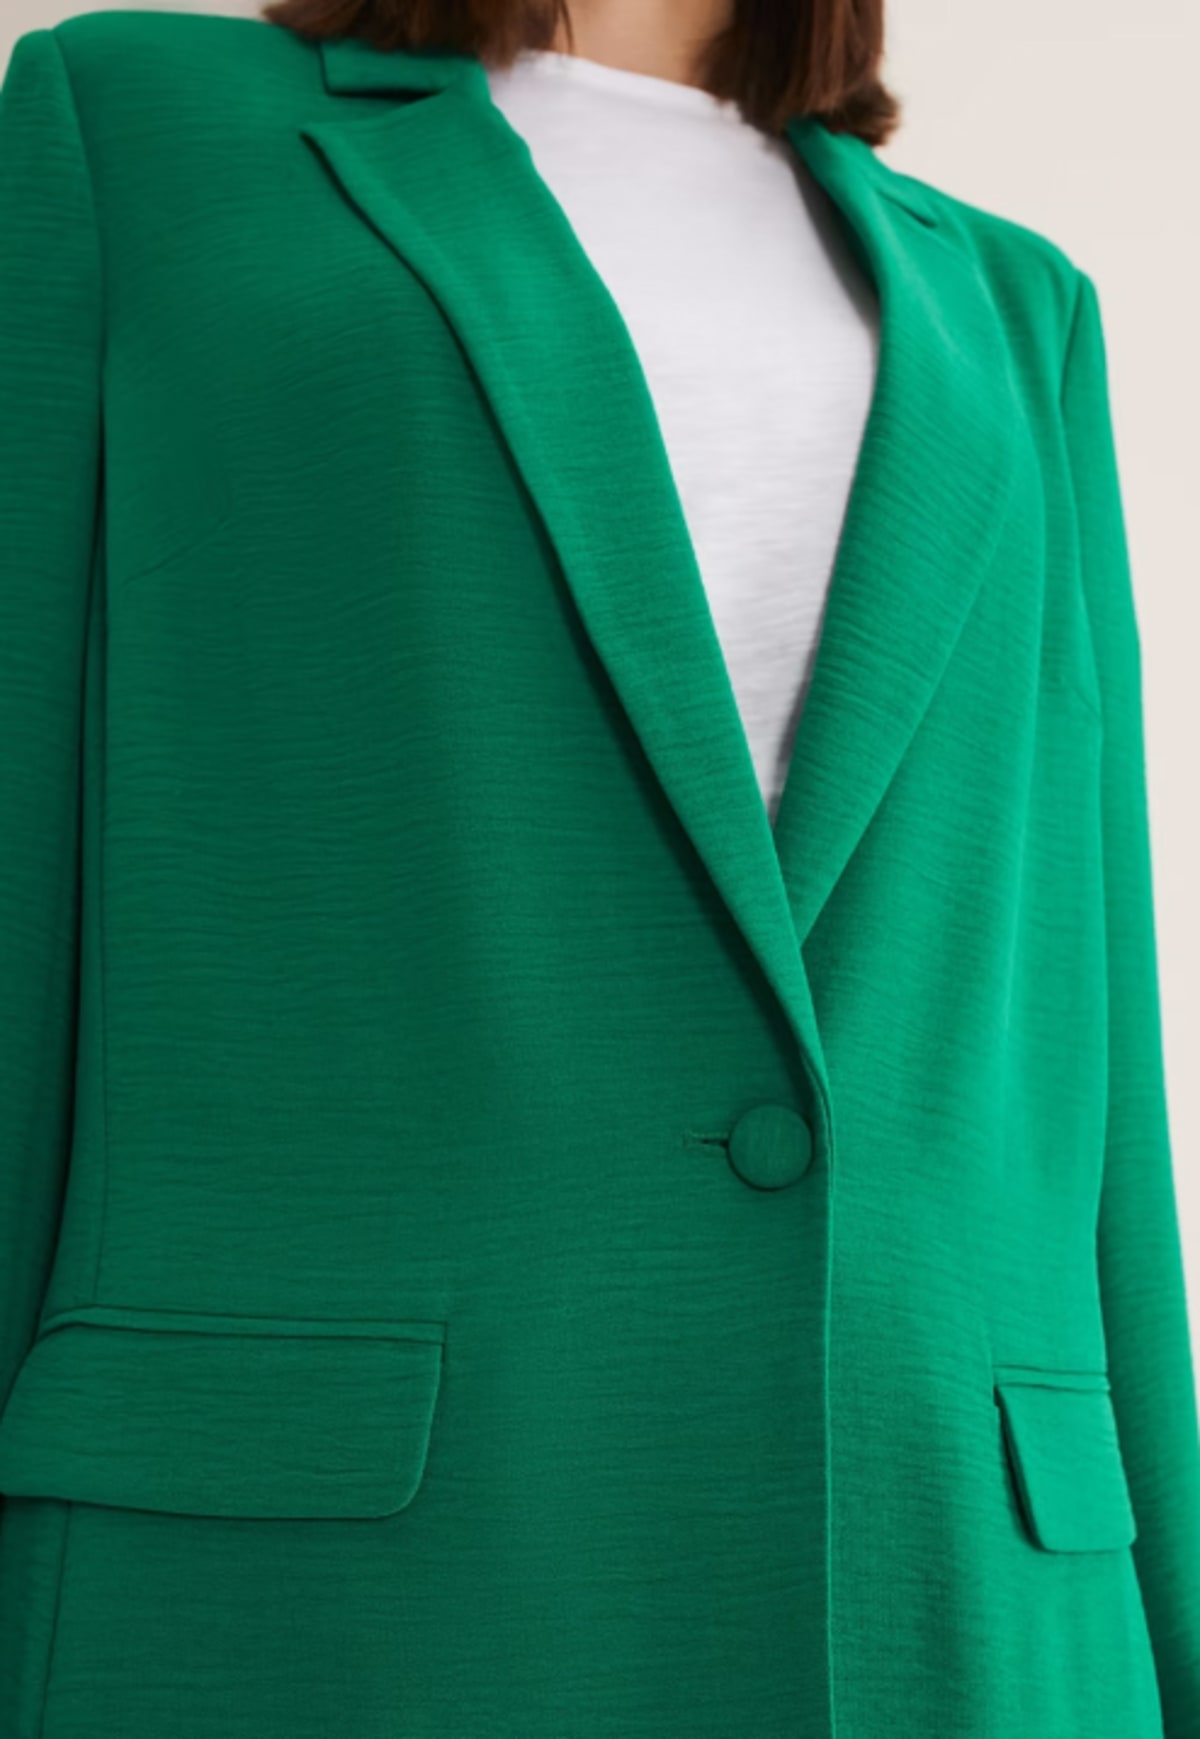 Phase Eight green suit jacket